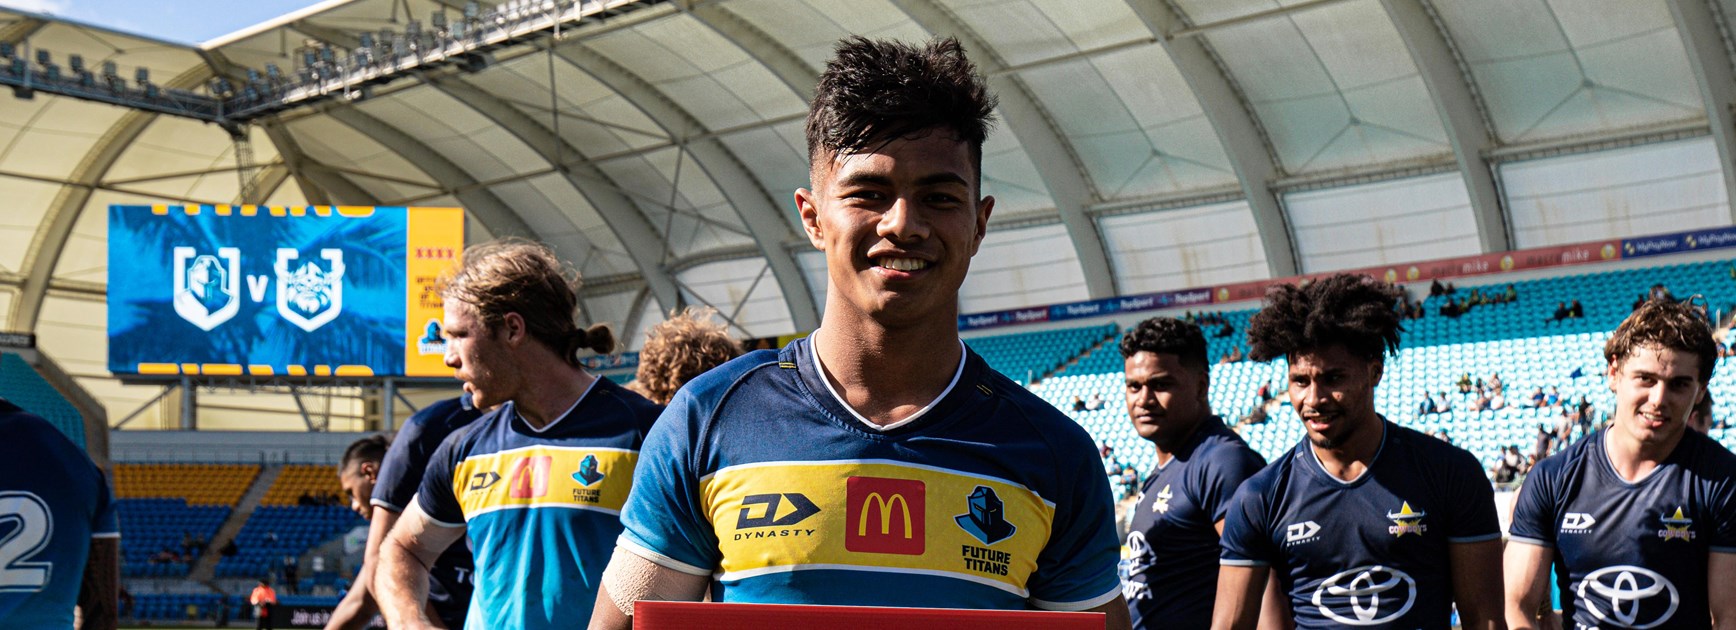 Kini shines in physical Future Titans bout against North Queensland